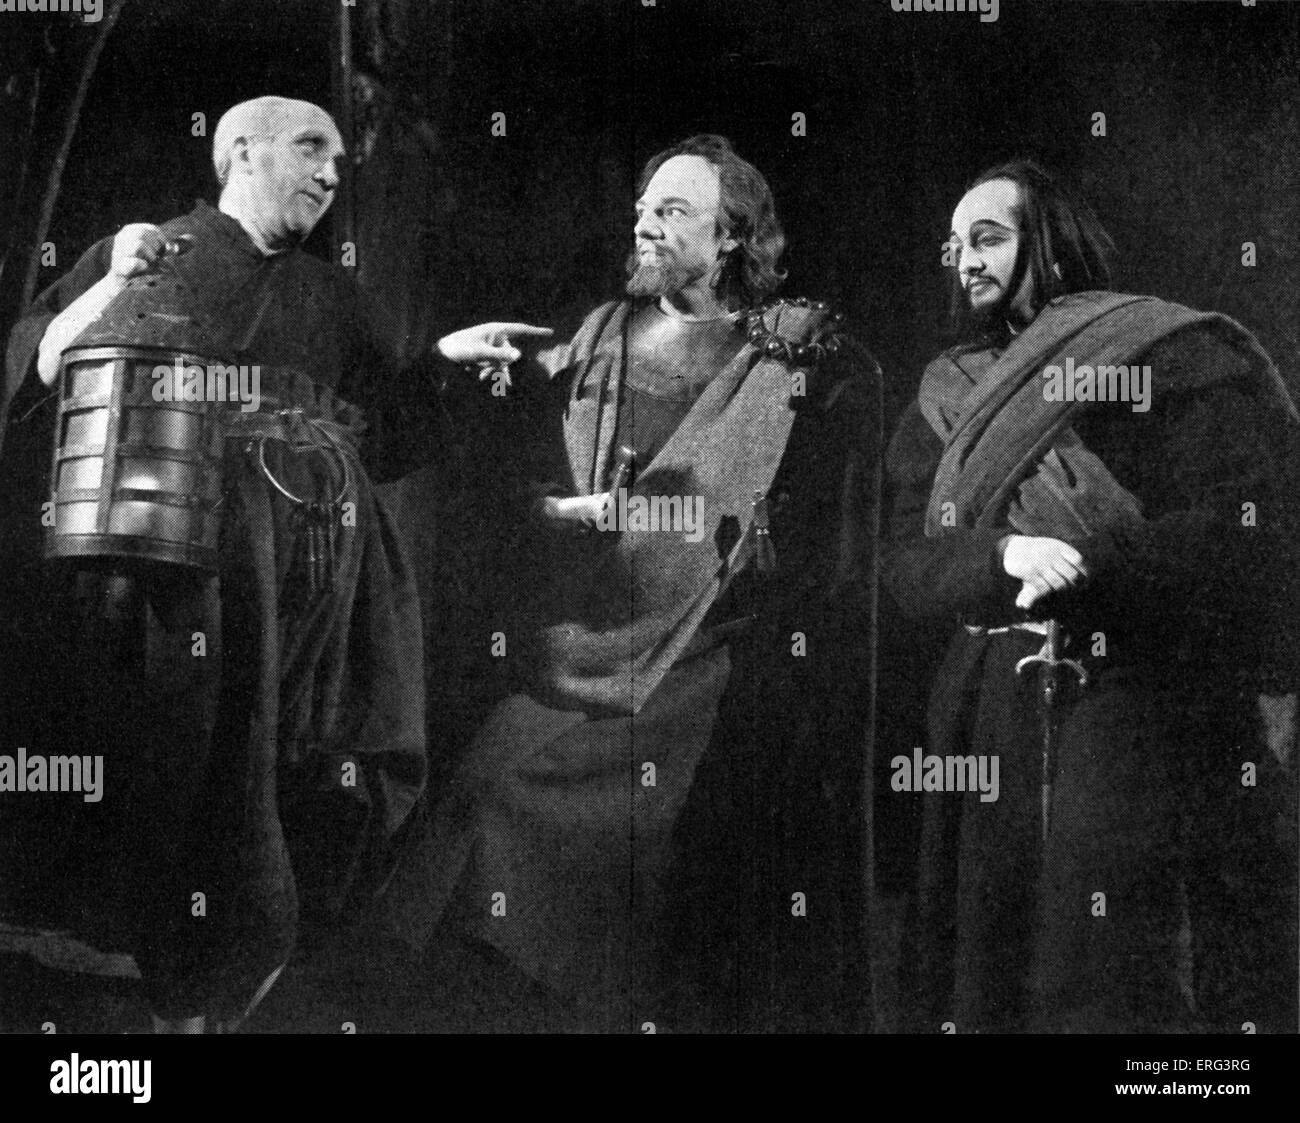 Macbeth' by William Shakespeare, with John Rae as the Porter, Ellis Irving as Macduff and Basil Langton as Lennox. Produced by Michael Saint-Denis at the Old Vic, 1937/8. Stock Photo